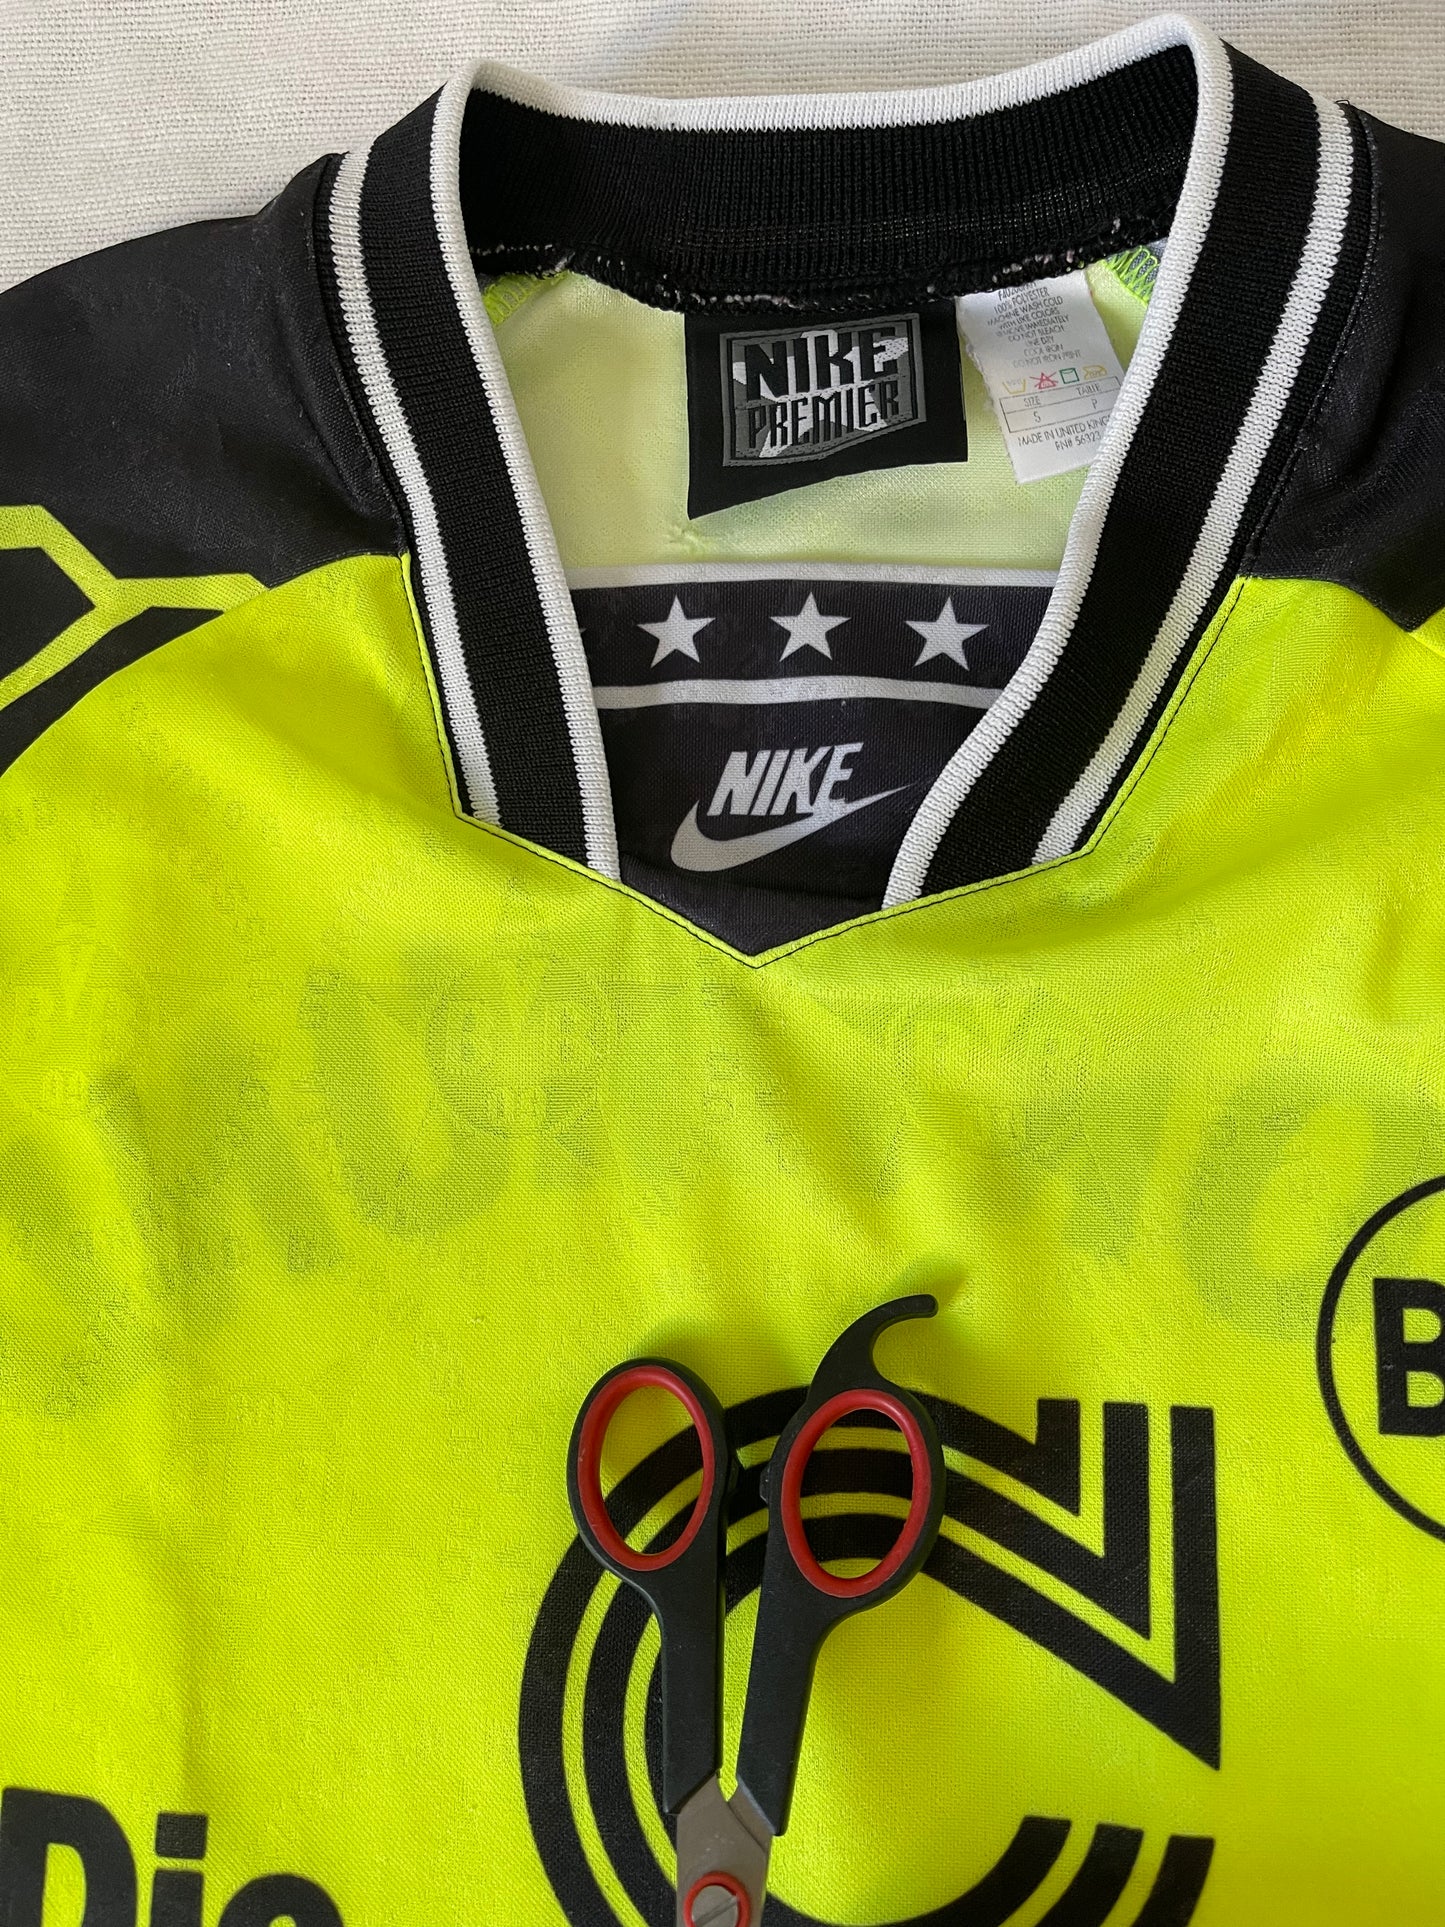 Vintage Nike Premier Football Shirt BVB Borussia Dortmund Home Neon 1994-1995 Eagle Wings Template Size S Die Continentale Long Sleeve Made in UK